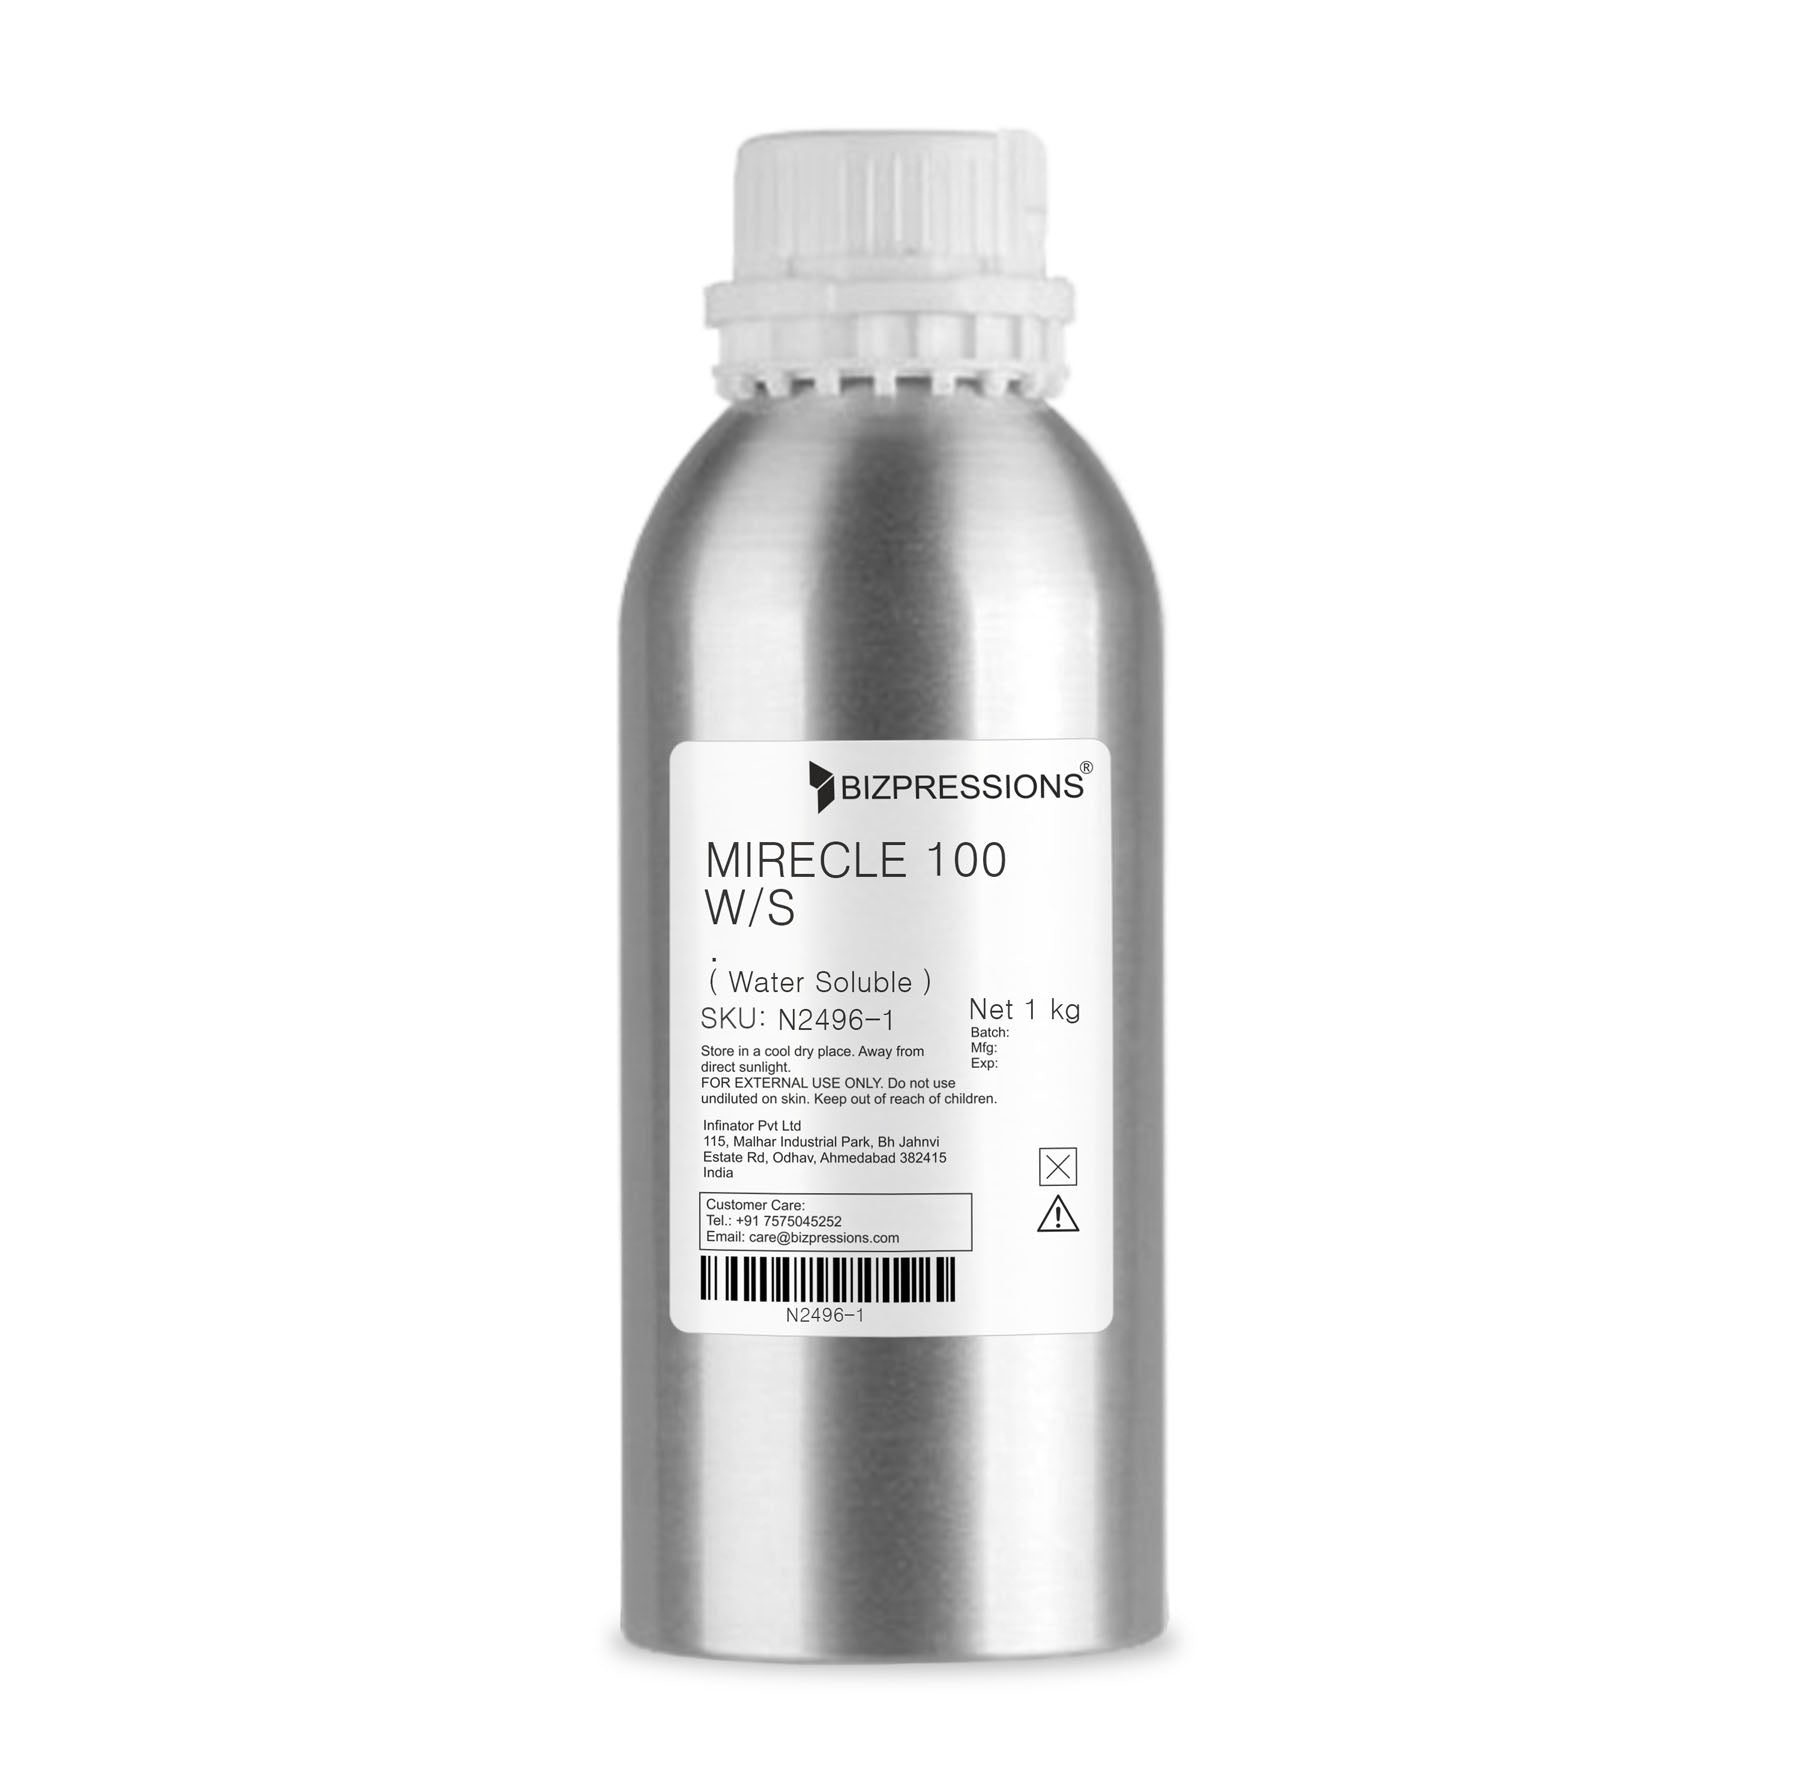 MIRECLE 100 W/S - Fragrance ( Water Soluble ) - 1 kg